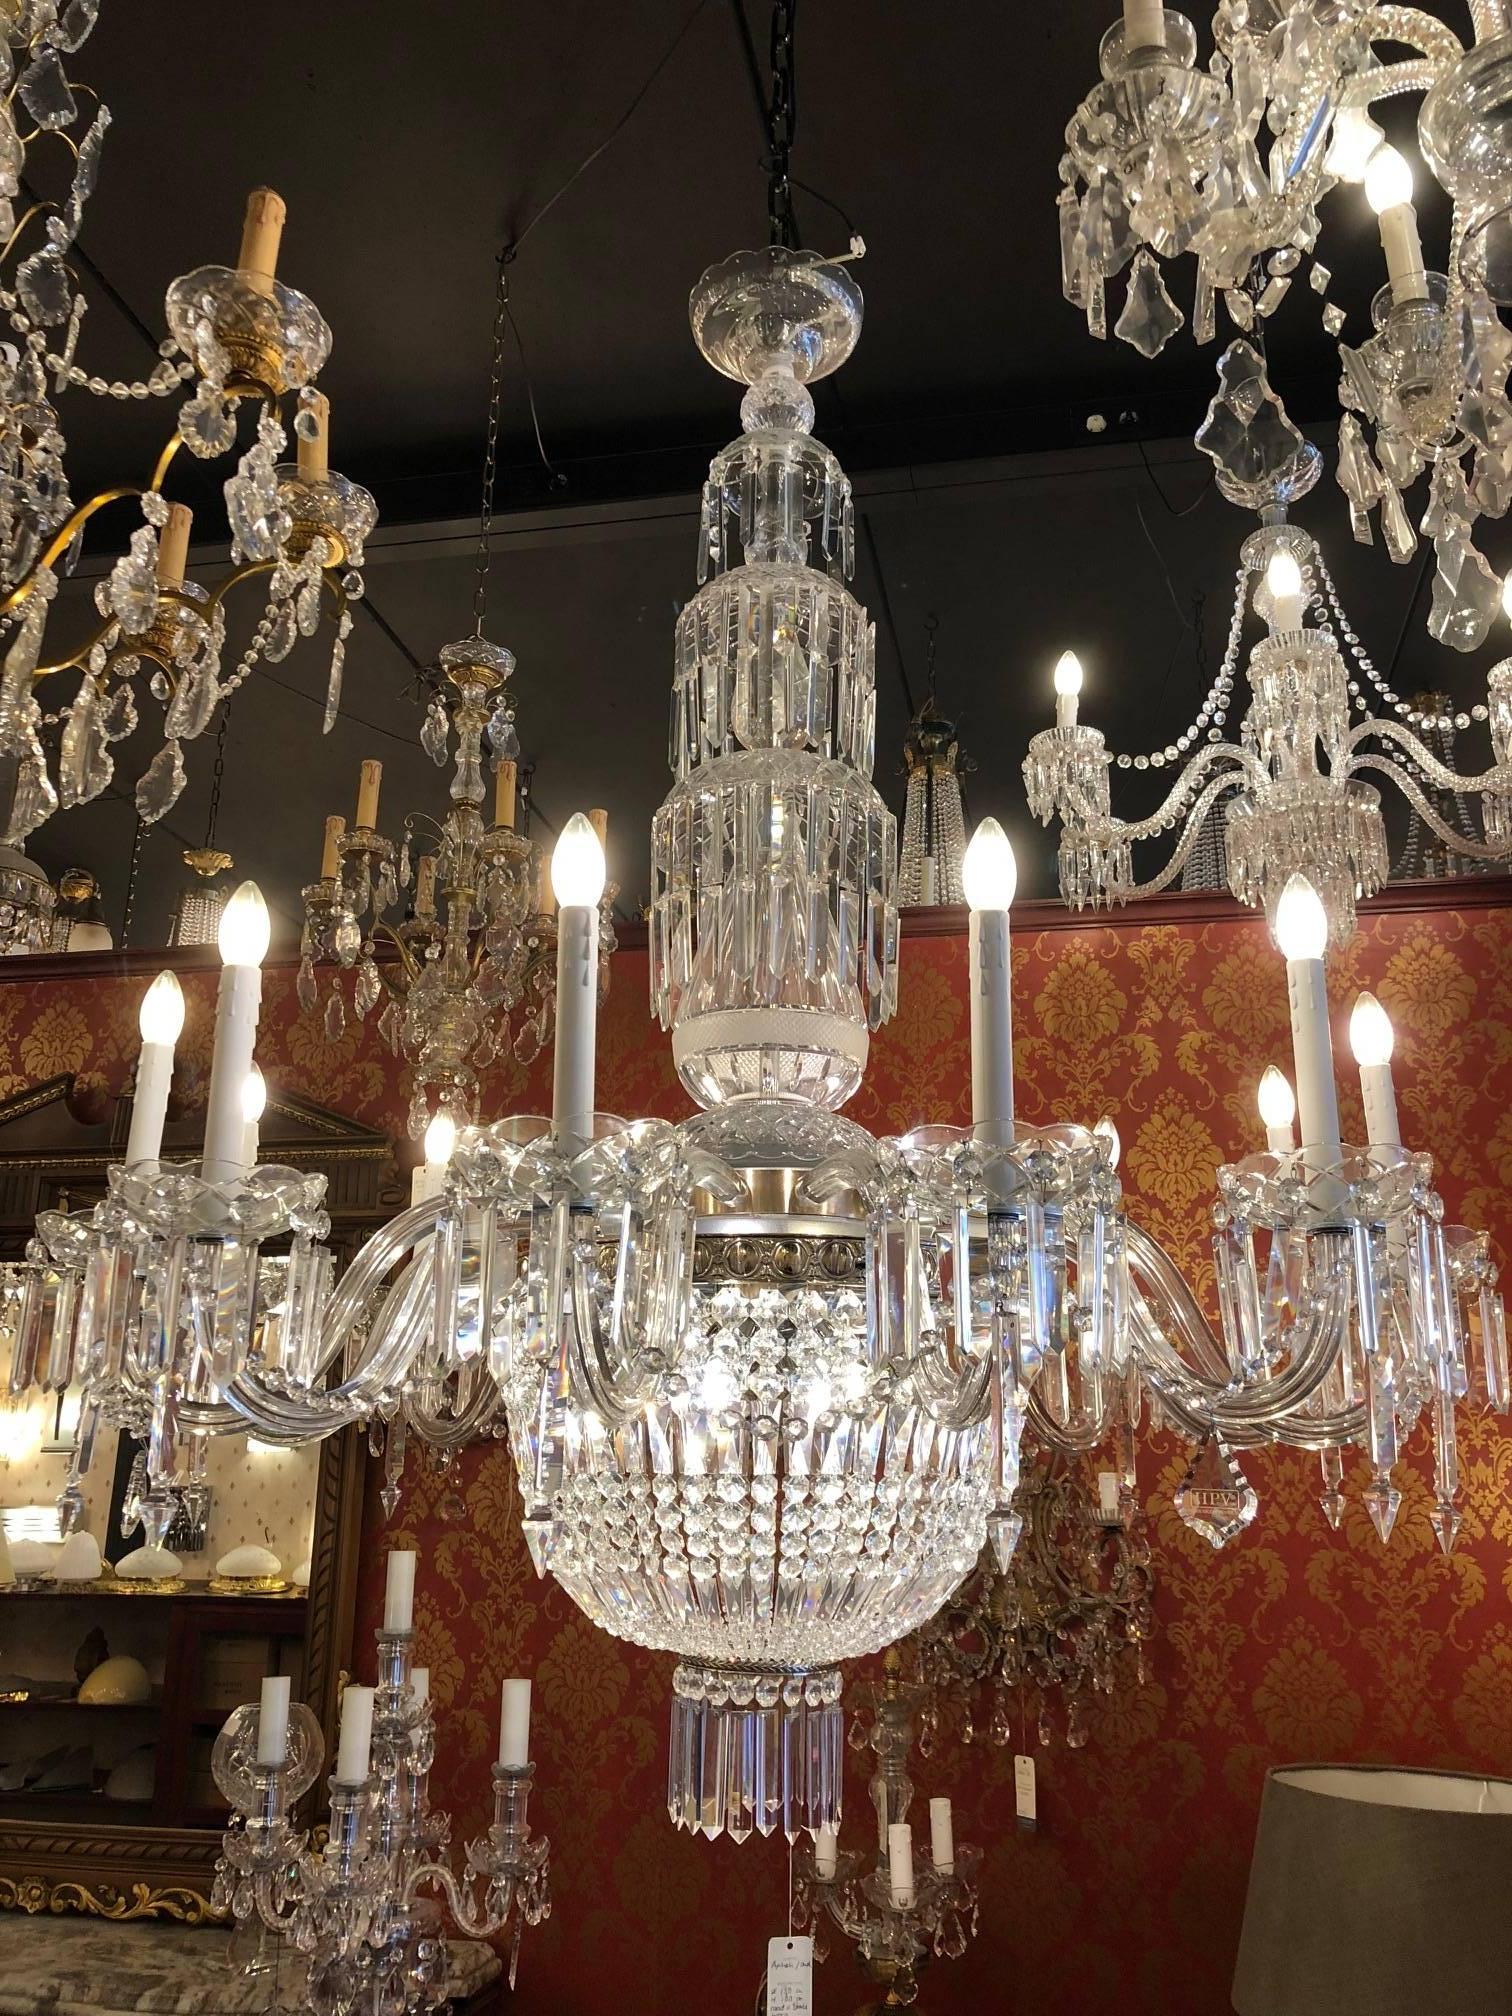 19th silver color century cut crystal chandelier from Czech Republic.
This chandelier has been recently restored.
 